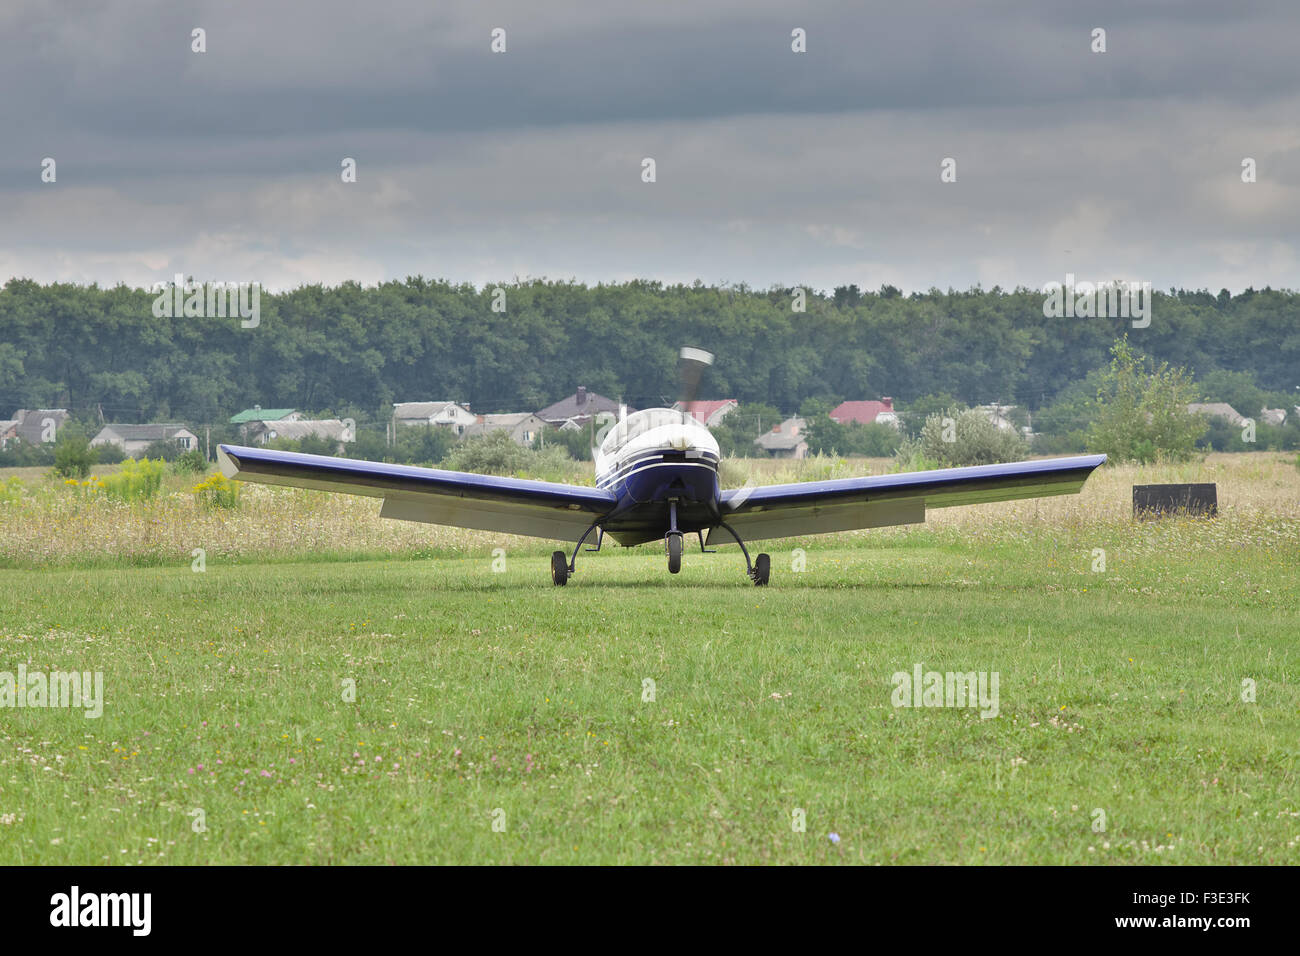 Small private plane touching down under the stormy clouds Stock Photo